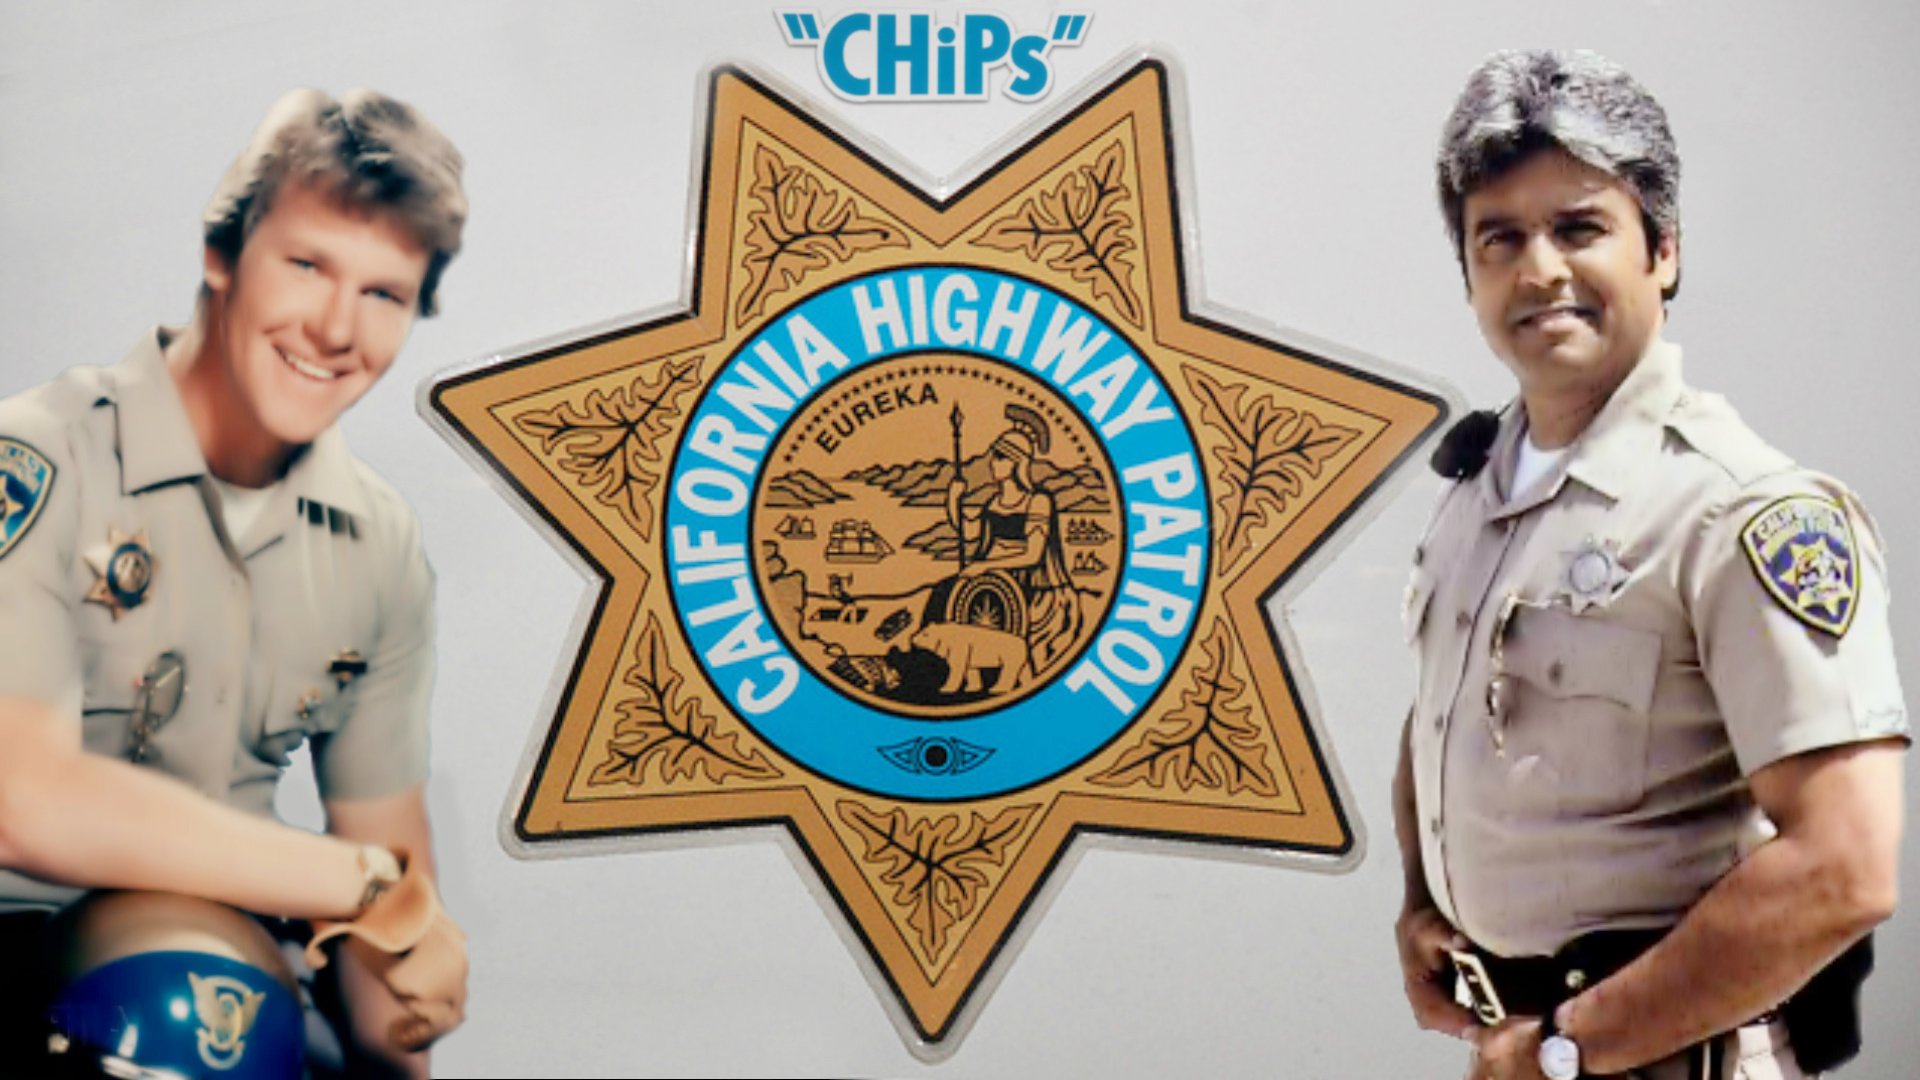 Free HD tv show, chips